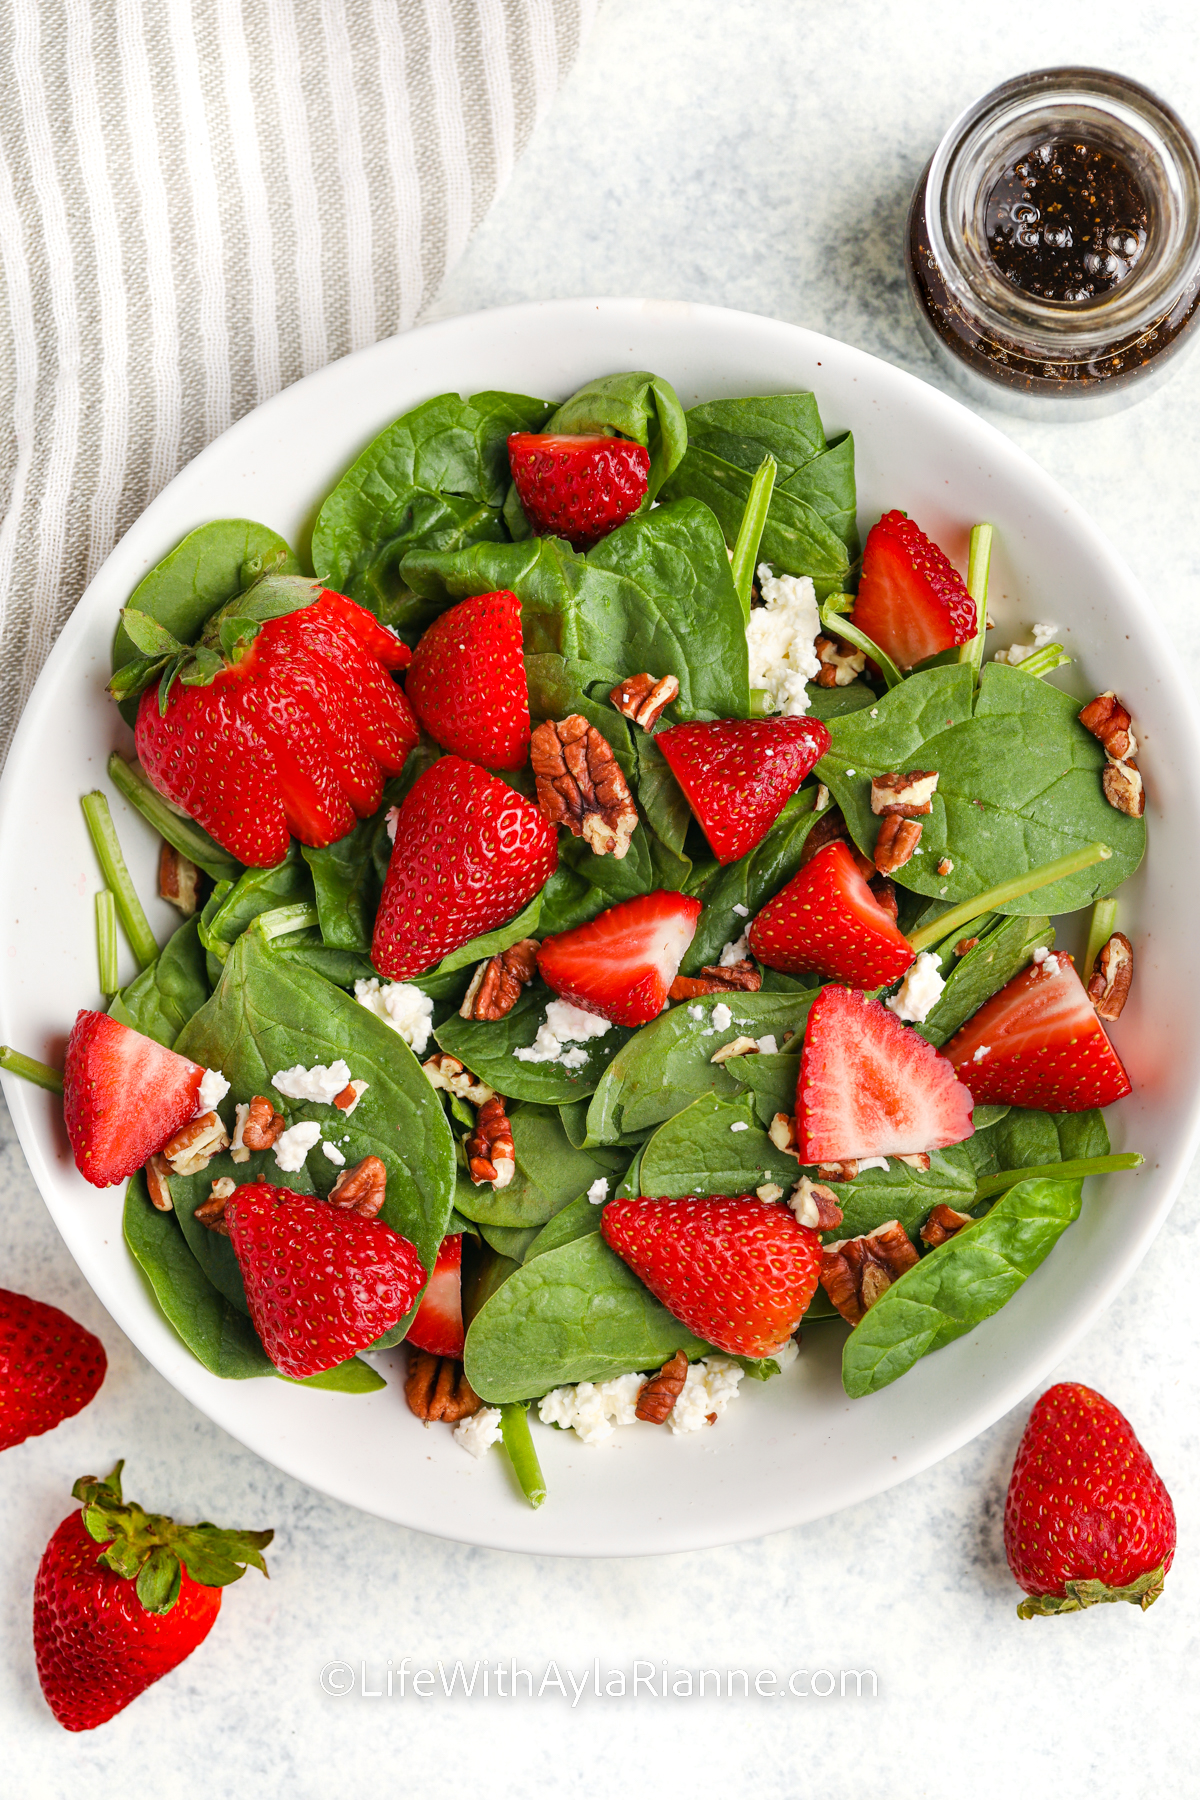 https://aylarianne.com/wp-content/uploads/2023/06/Strawberry-Spinach-Salad-Recipe-SpendWithPennies-1.jpg